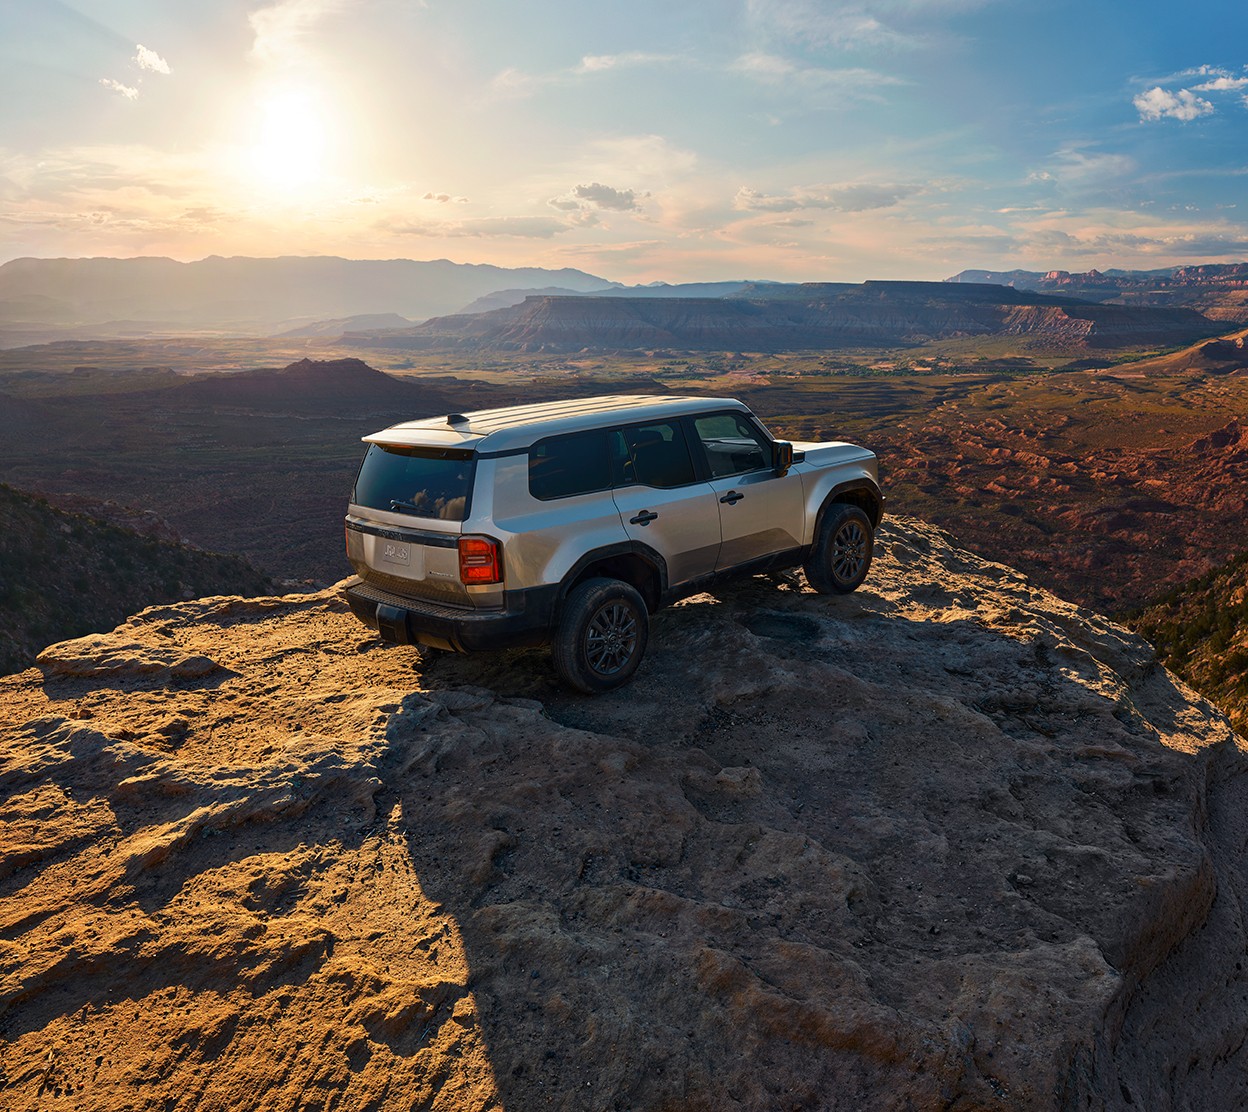 A Toyota truck is parked atop a rocky hill with a sunny mountain overlook in the background.